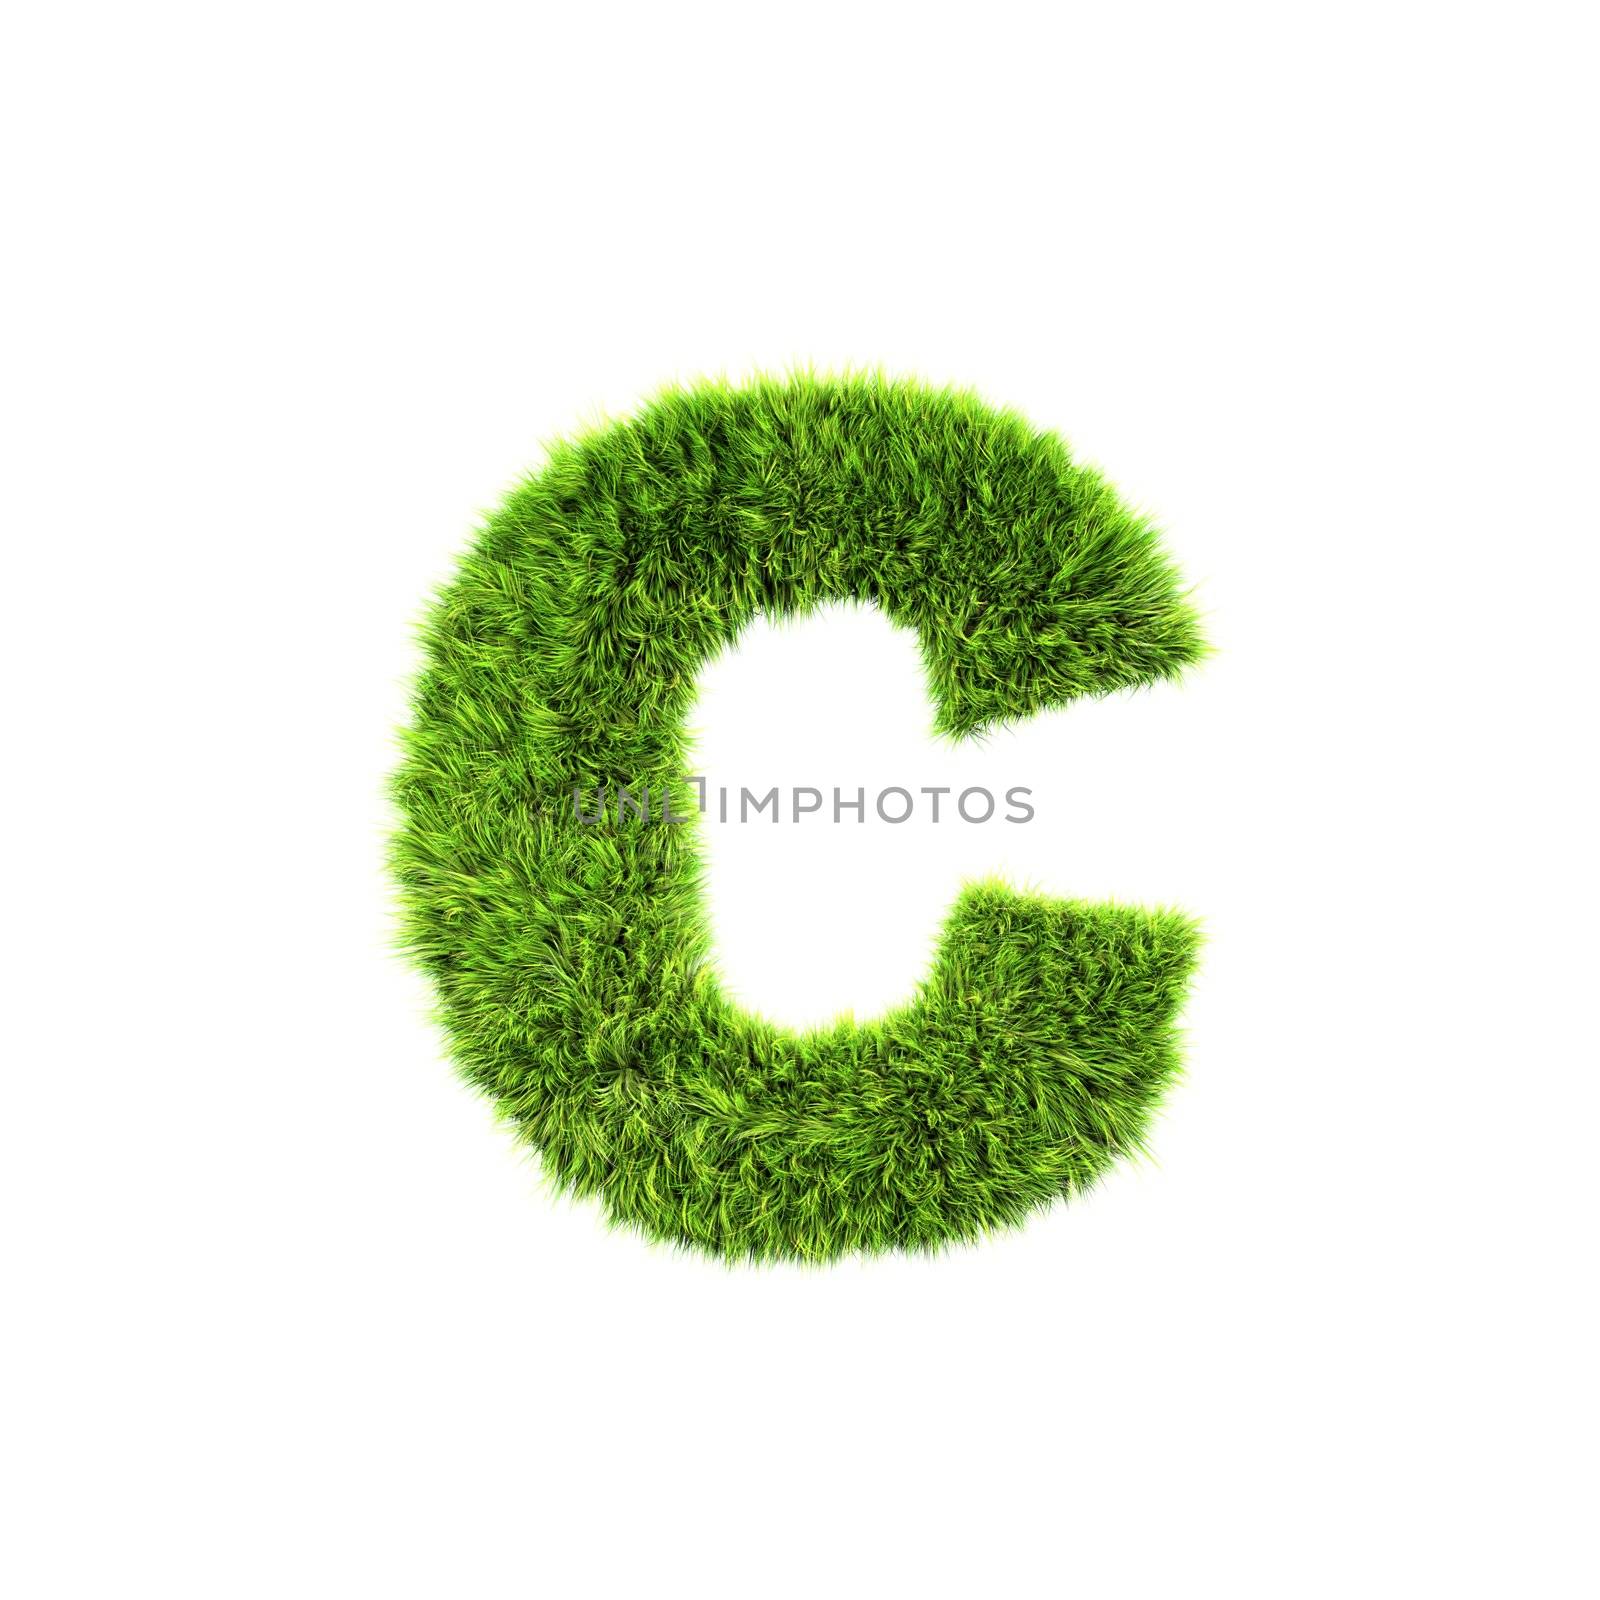 3d grass letter isolated on white background - c by chrisroll